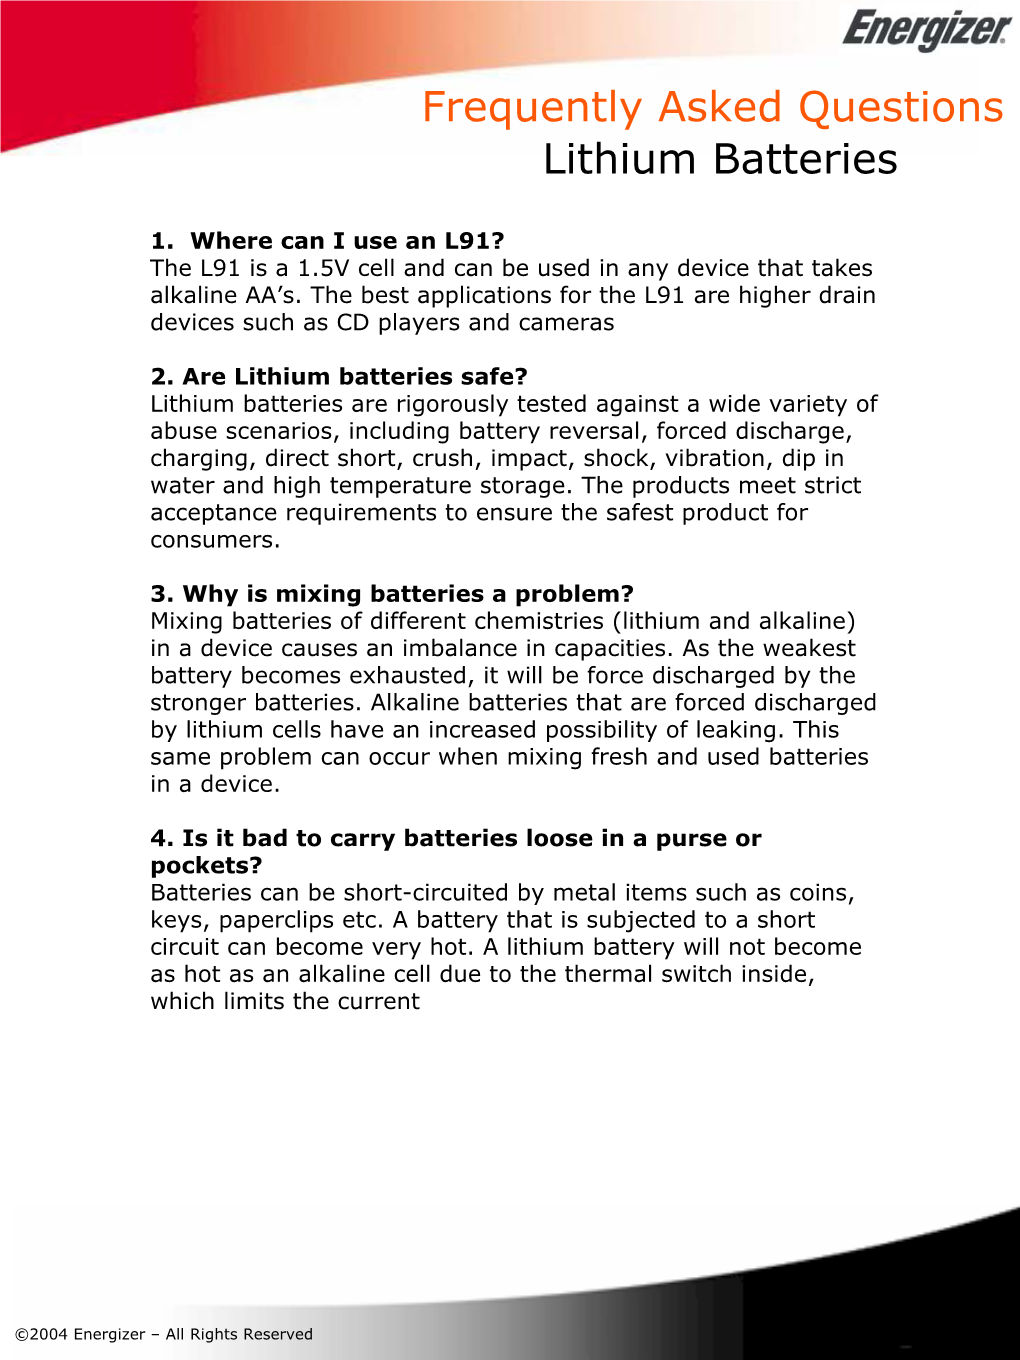 Frequently Asked Questions Lithium Batteries